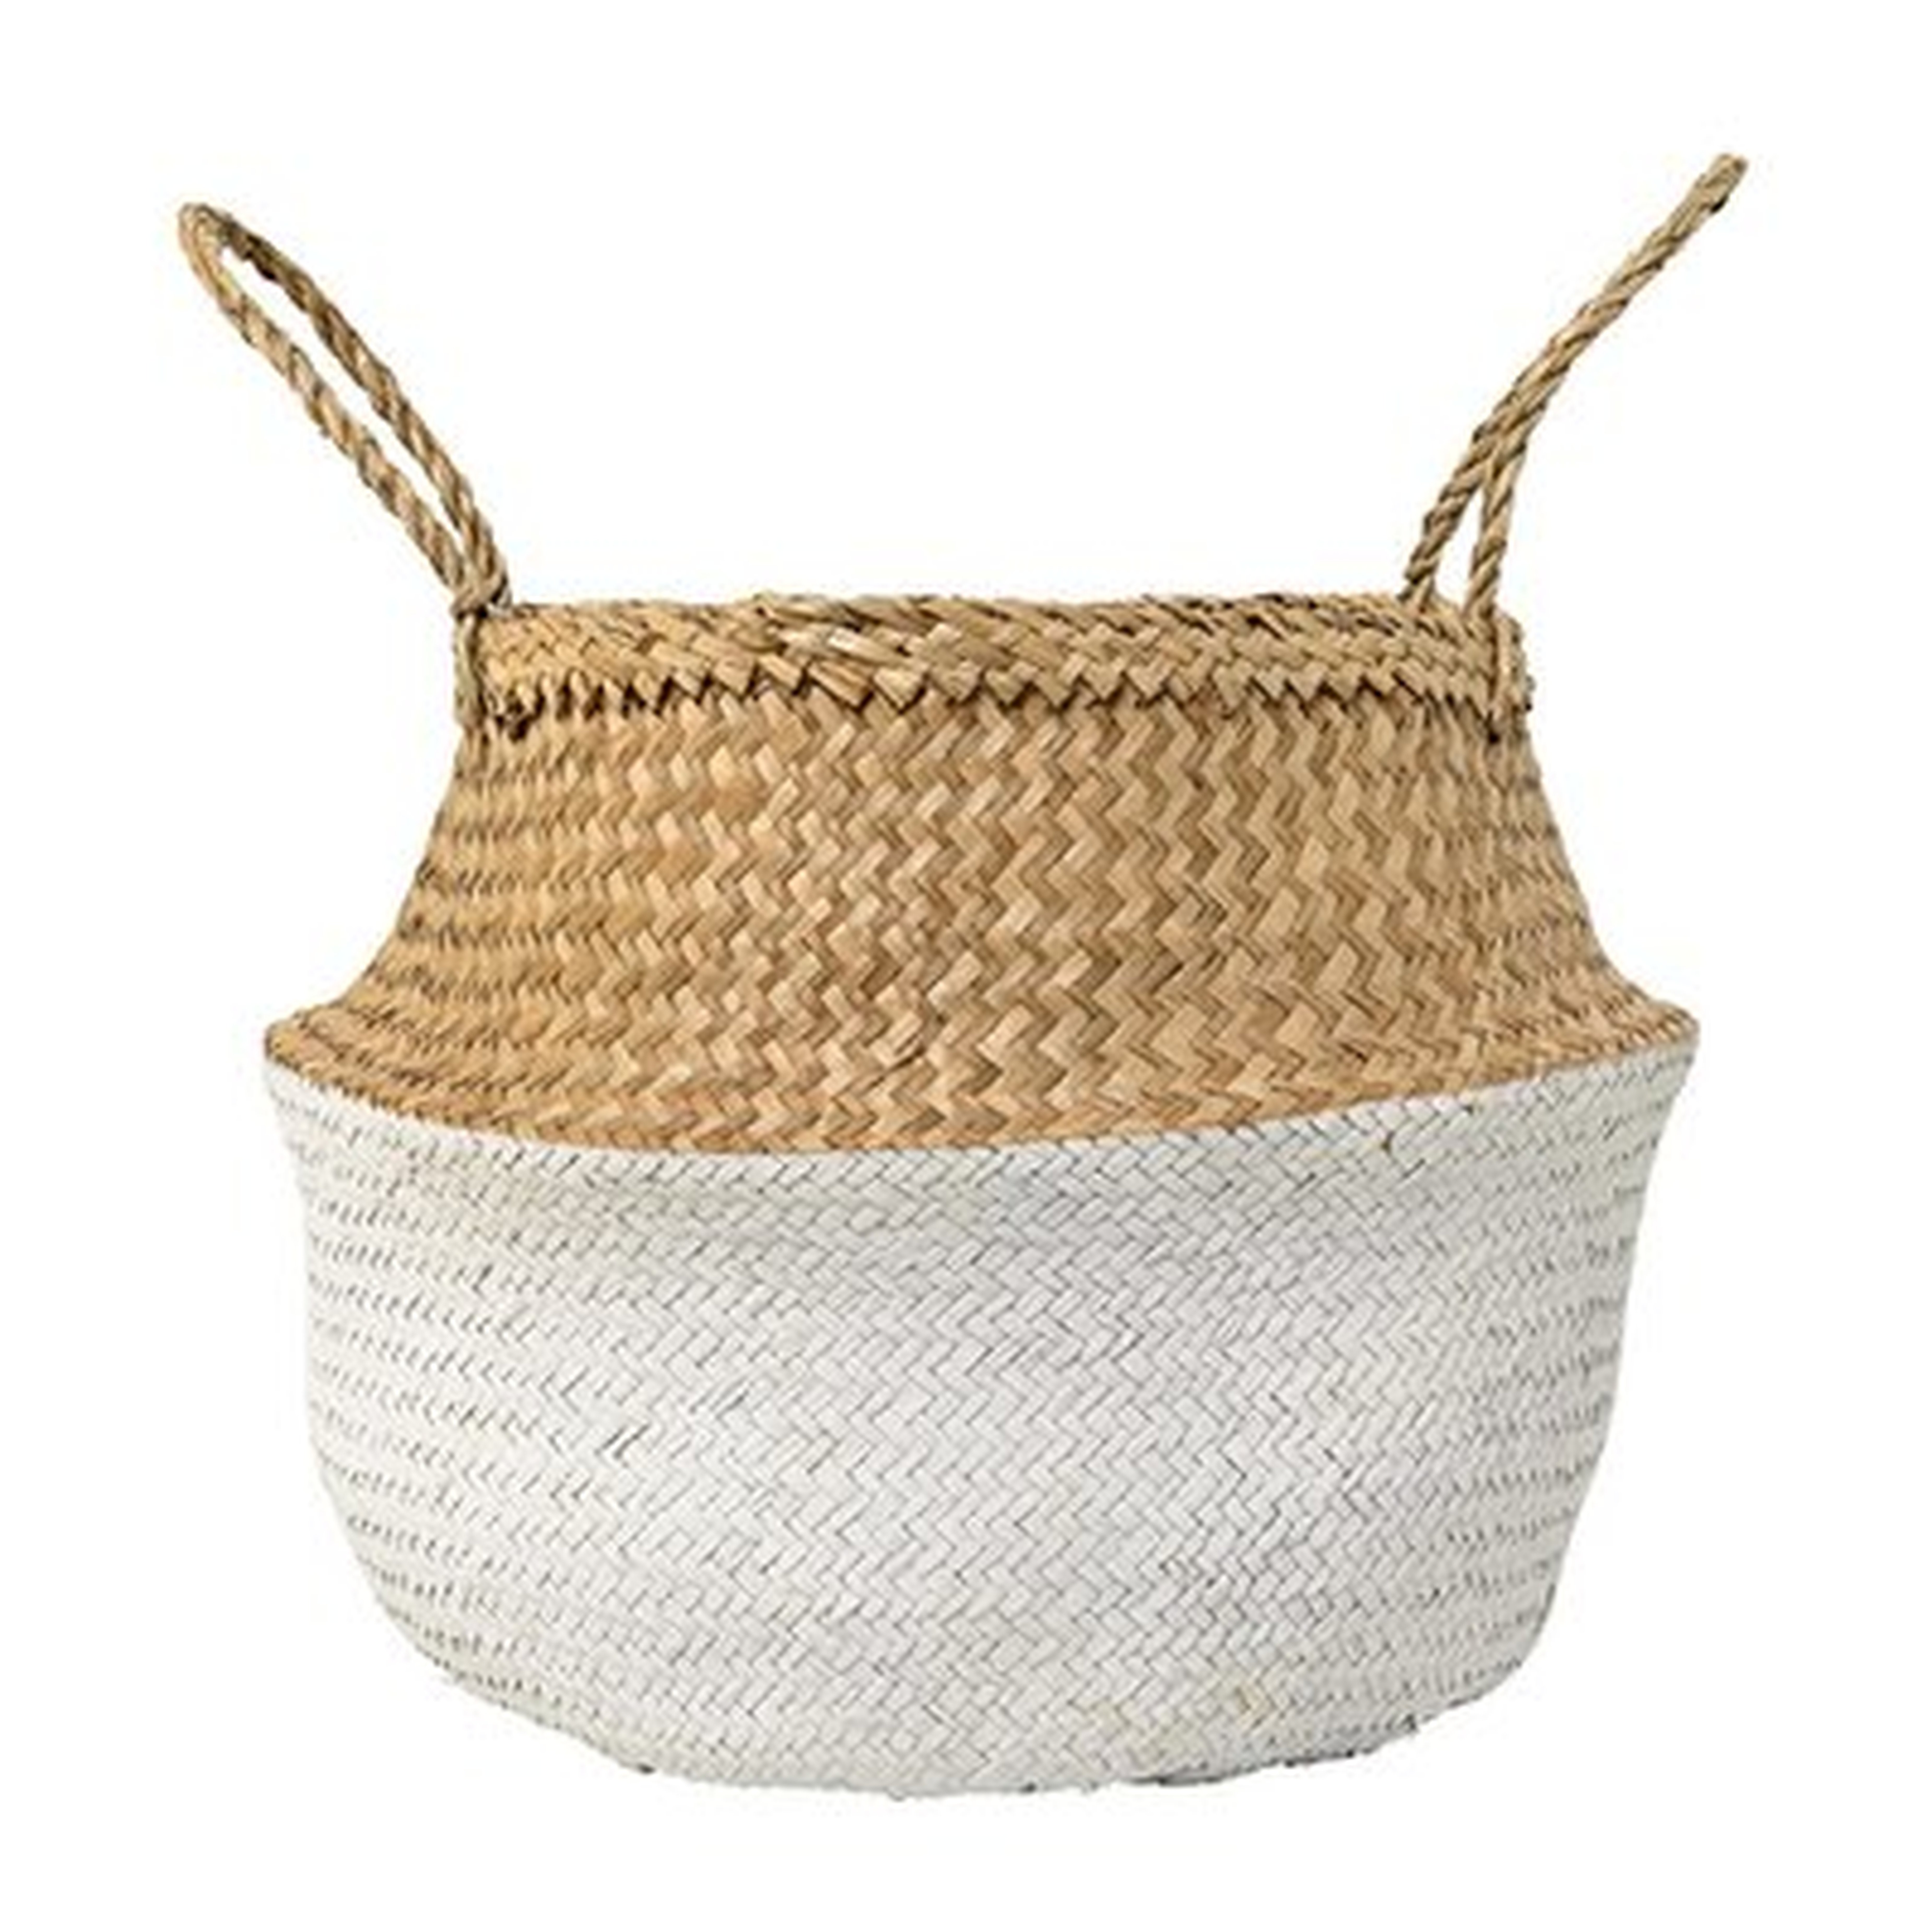 Seagrass Basket with Handles - White - Wayfair